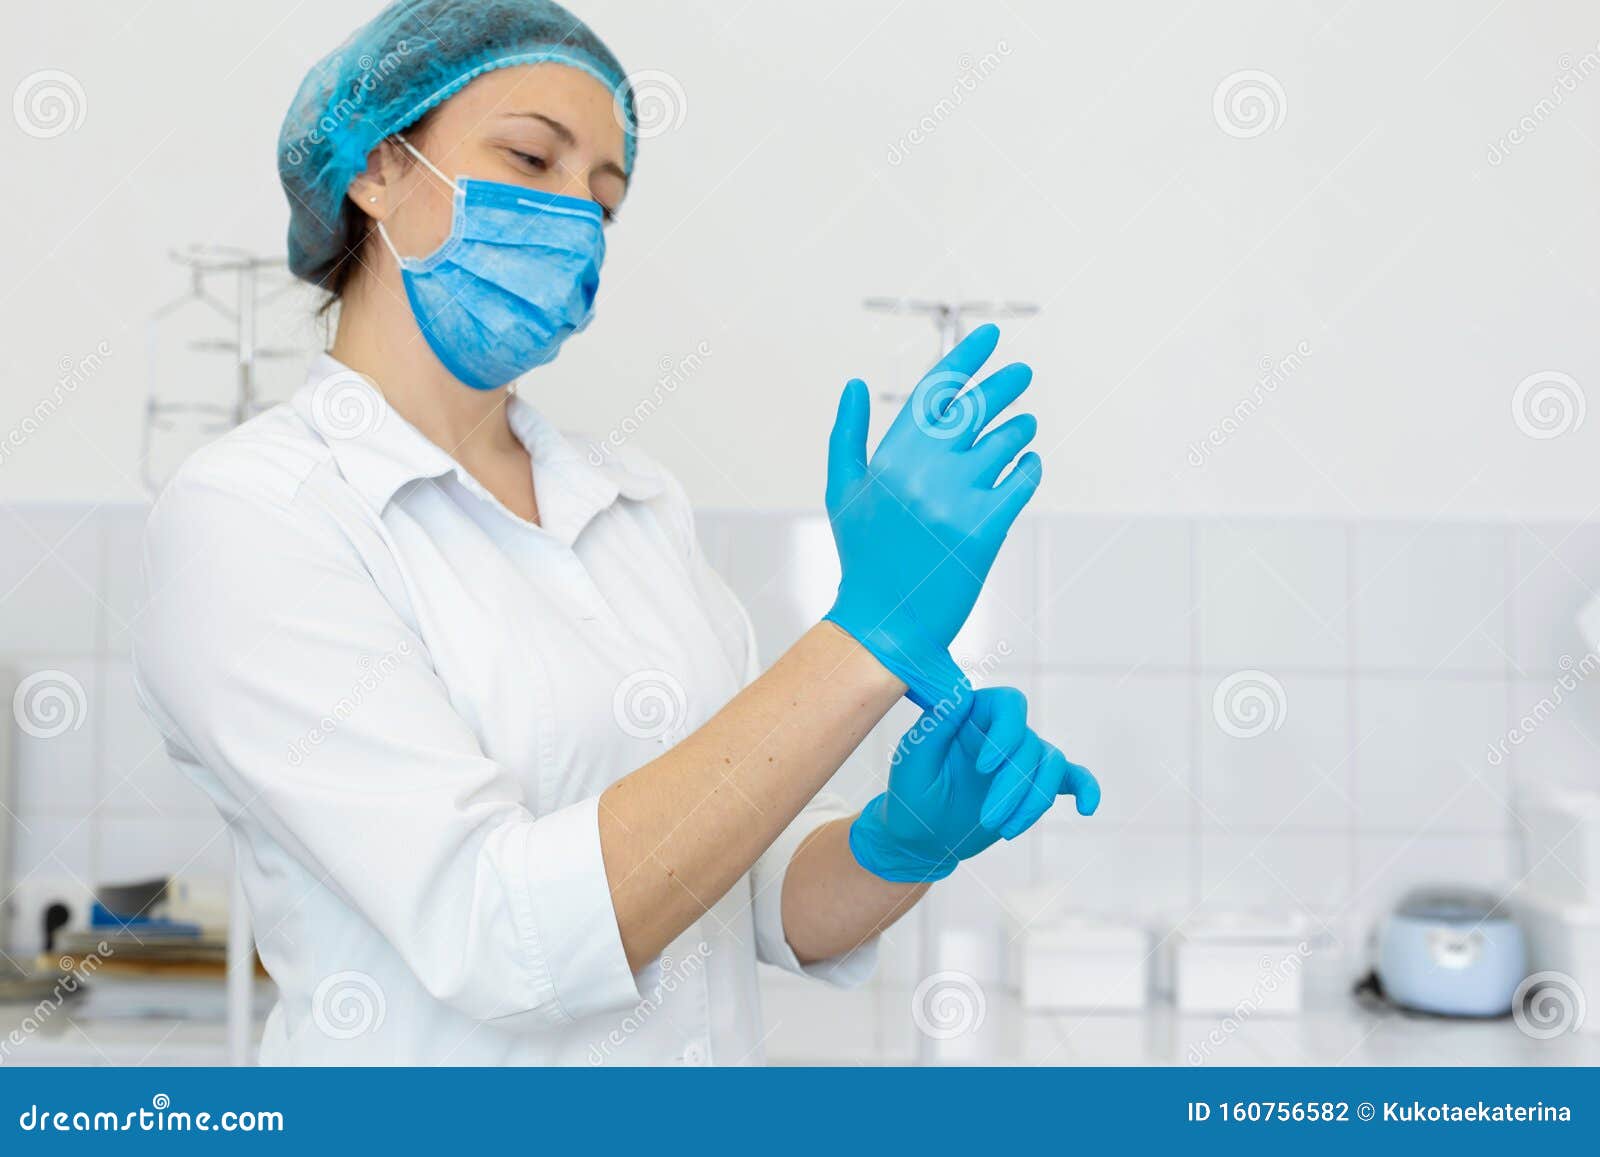 a nurse in a white coat puts on rubber gloves before a medical procedure in a bright handling room